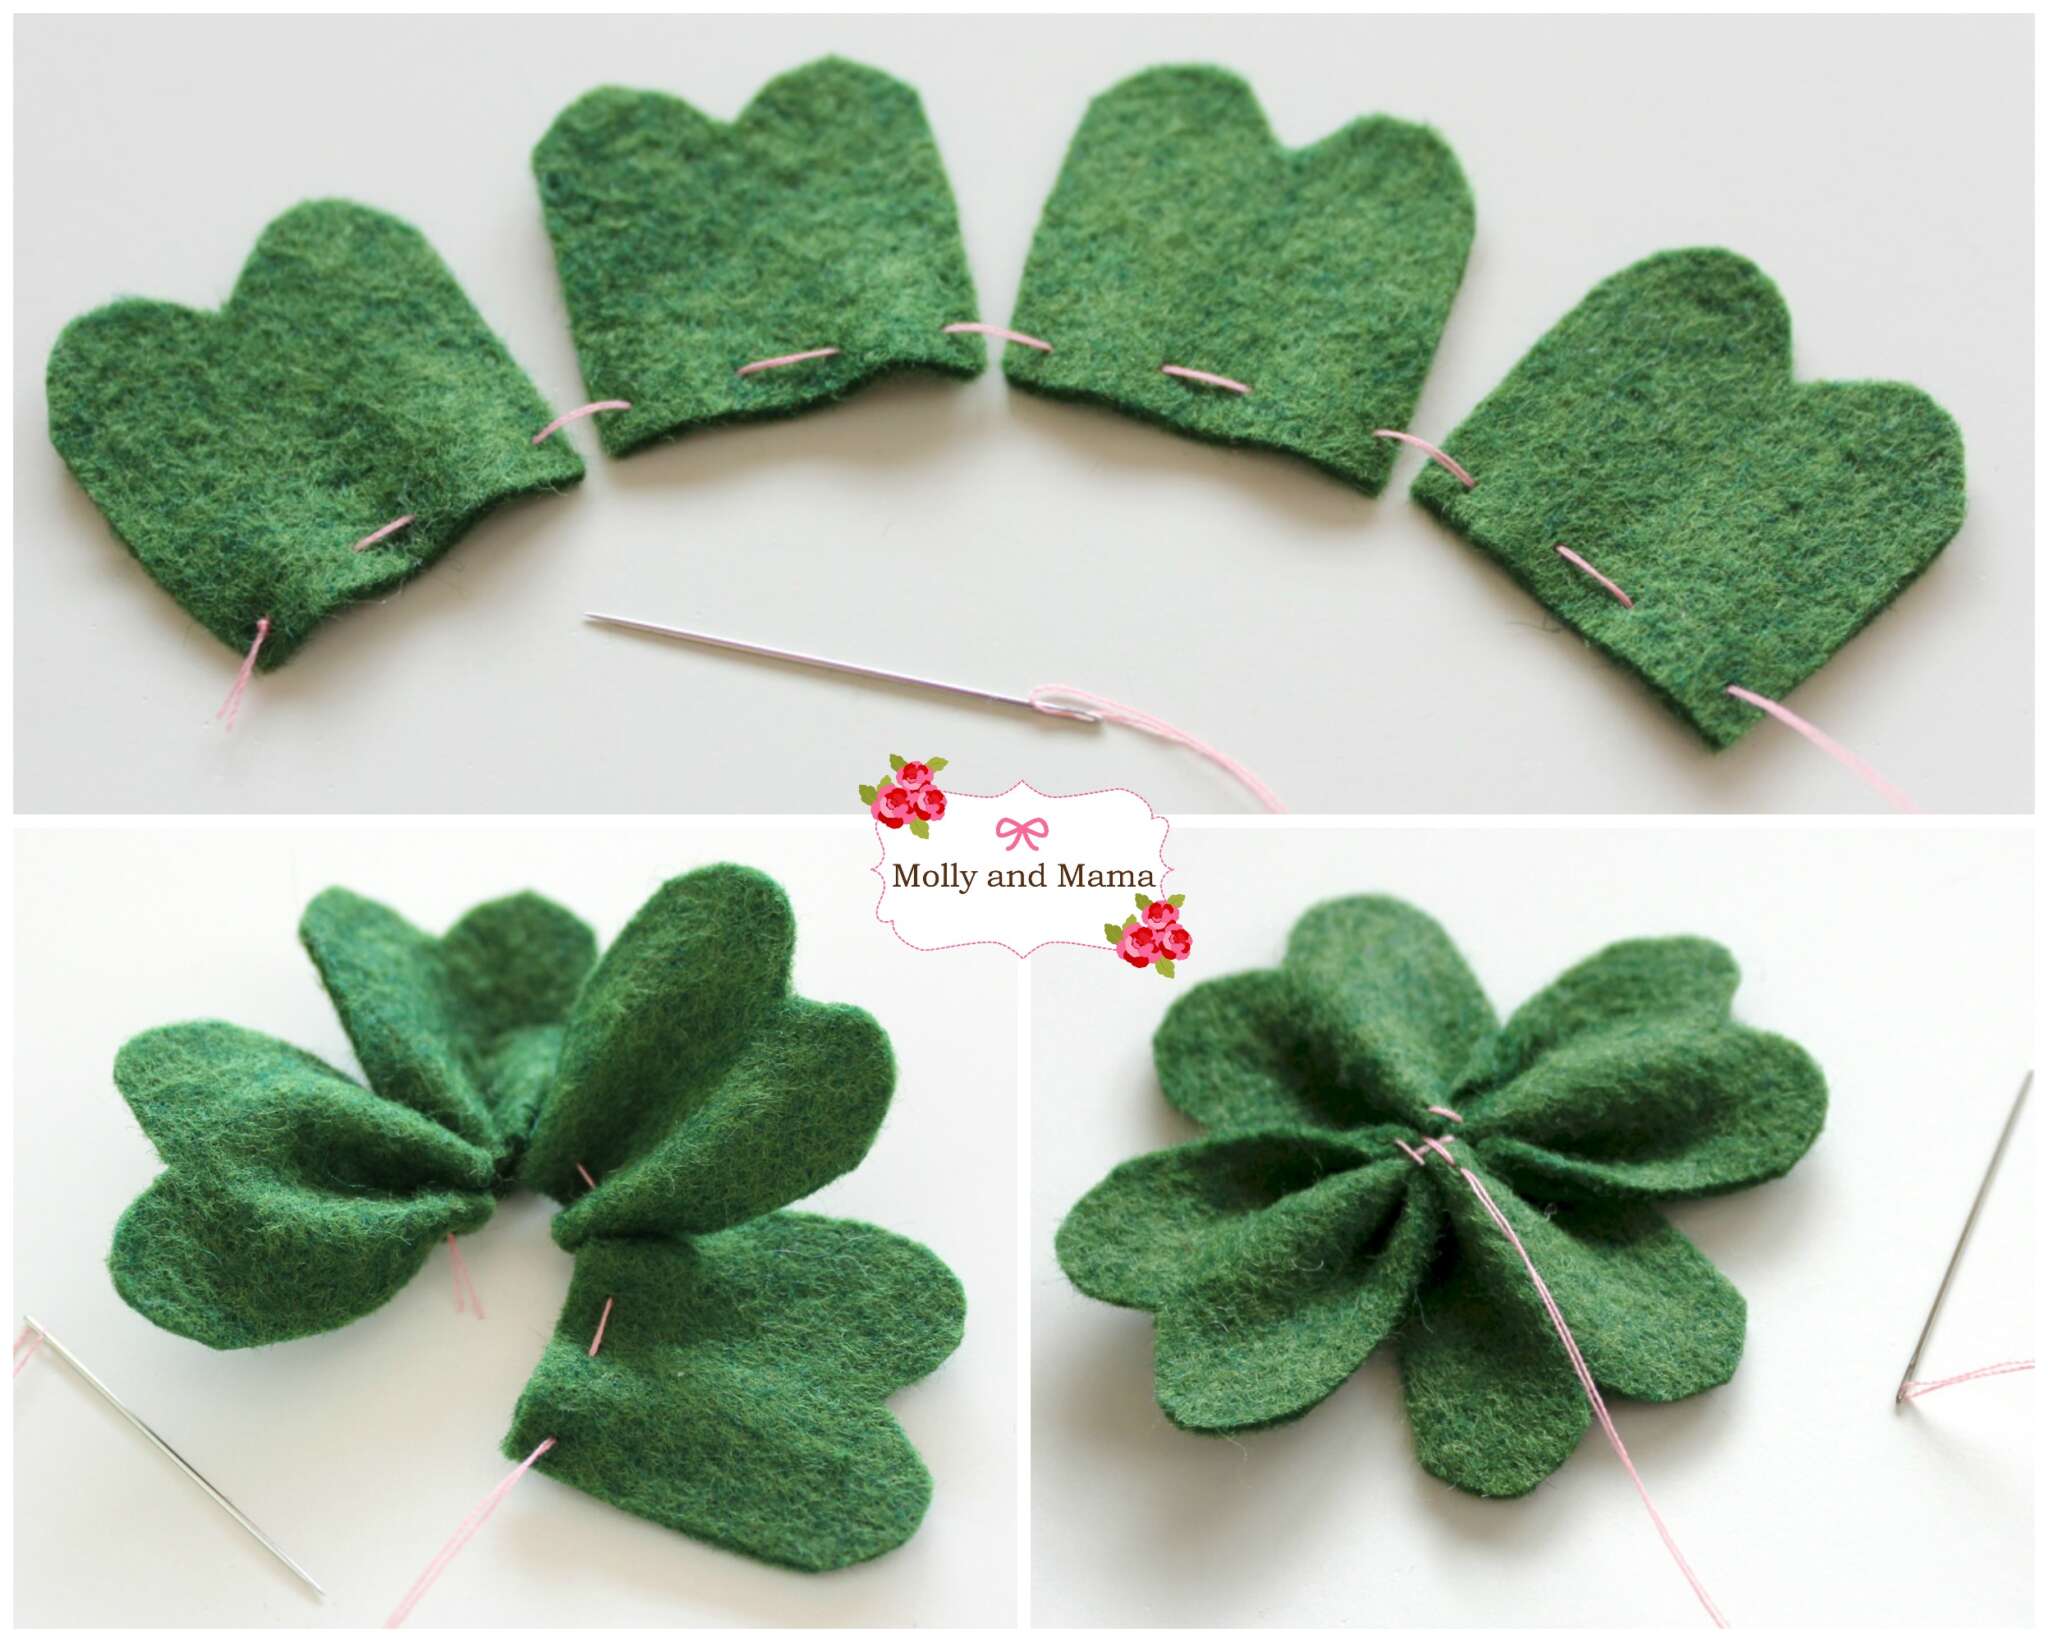 Sew a Four Leaf Clover with Molly and Mama